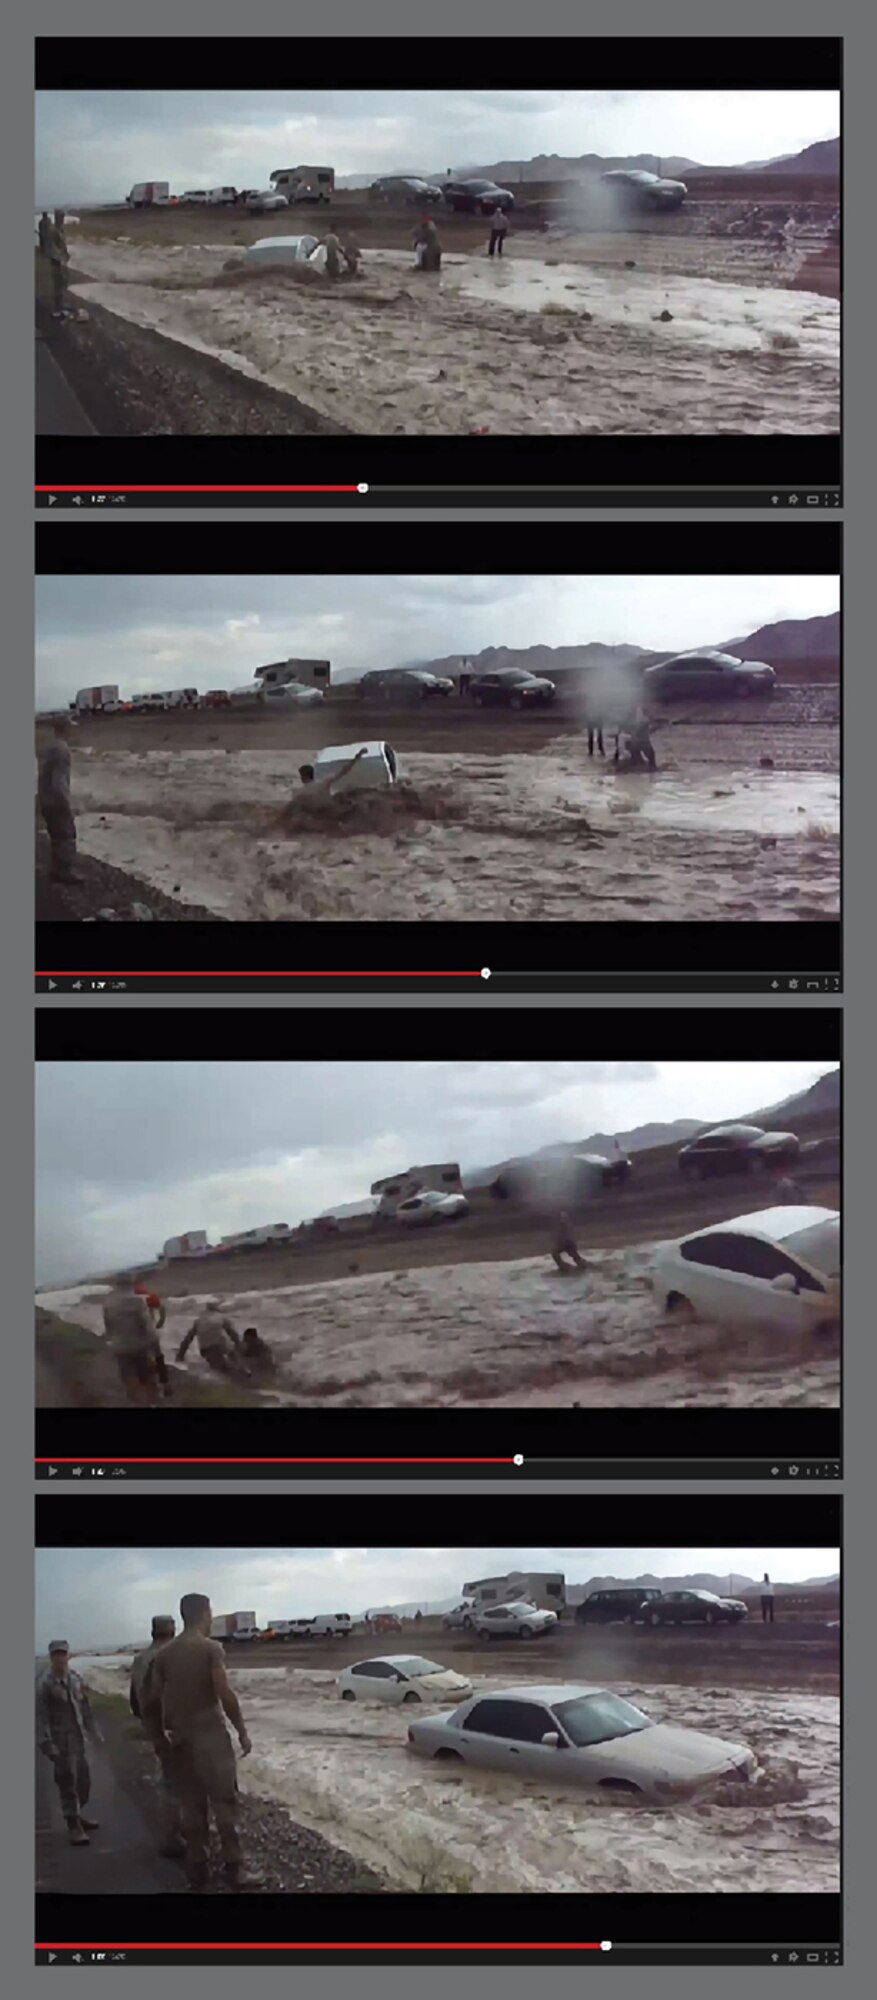 In video footage that went viral within days after the flood near Creech AFB, Nev., Aug. 4, Airmen can be seen rescuing an elderly couple, who’s Prius became stranded in the floodwaters. In another scene (frames two and three), Airman 1st Class Tyler Webb, who had assisted in the rescue of the couple, had to be saved after he was swept away by the raging waters. (Video footage courtesy of Doug Bennett)